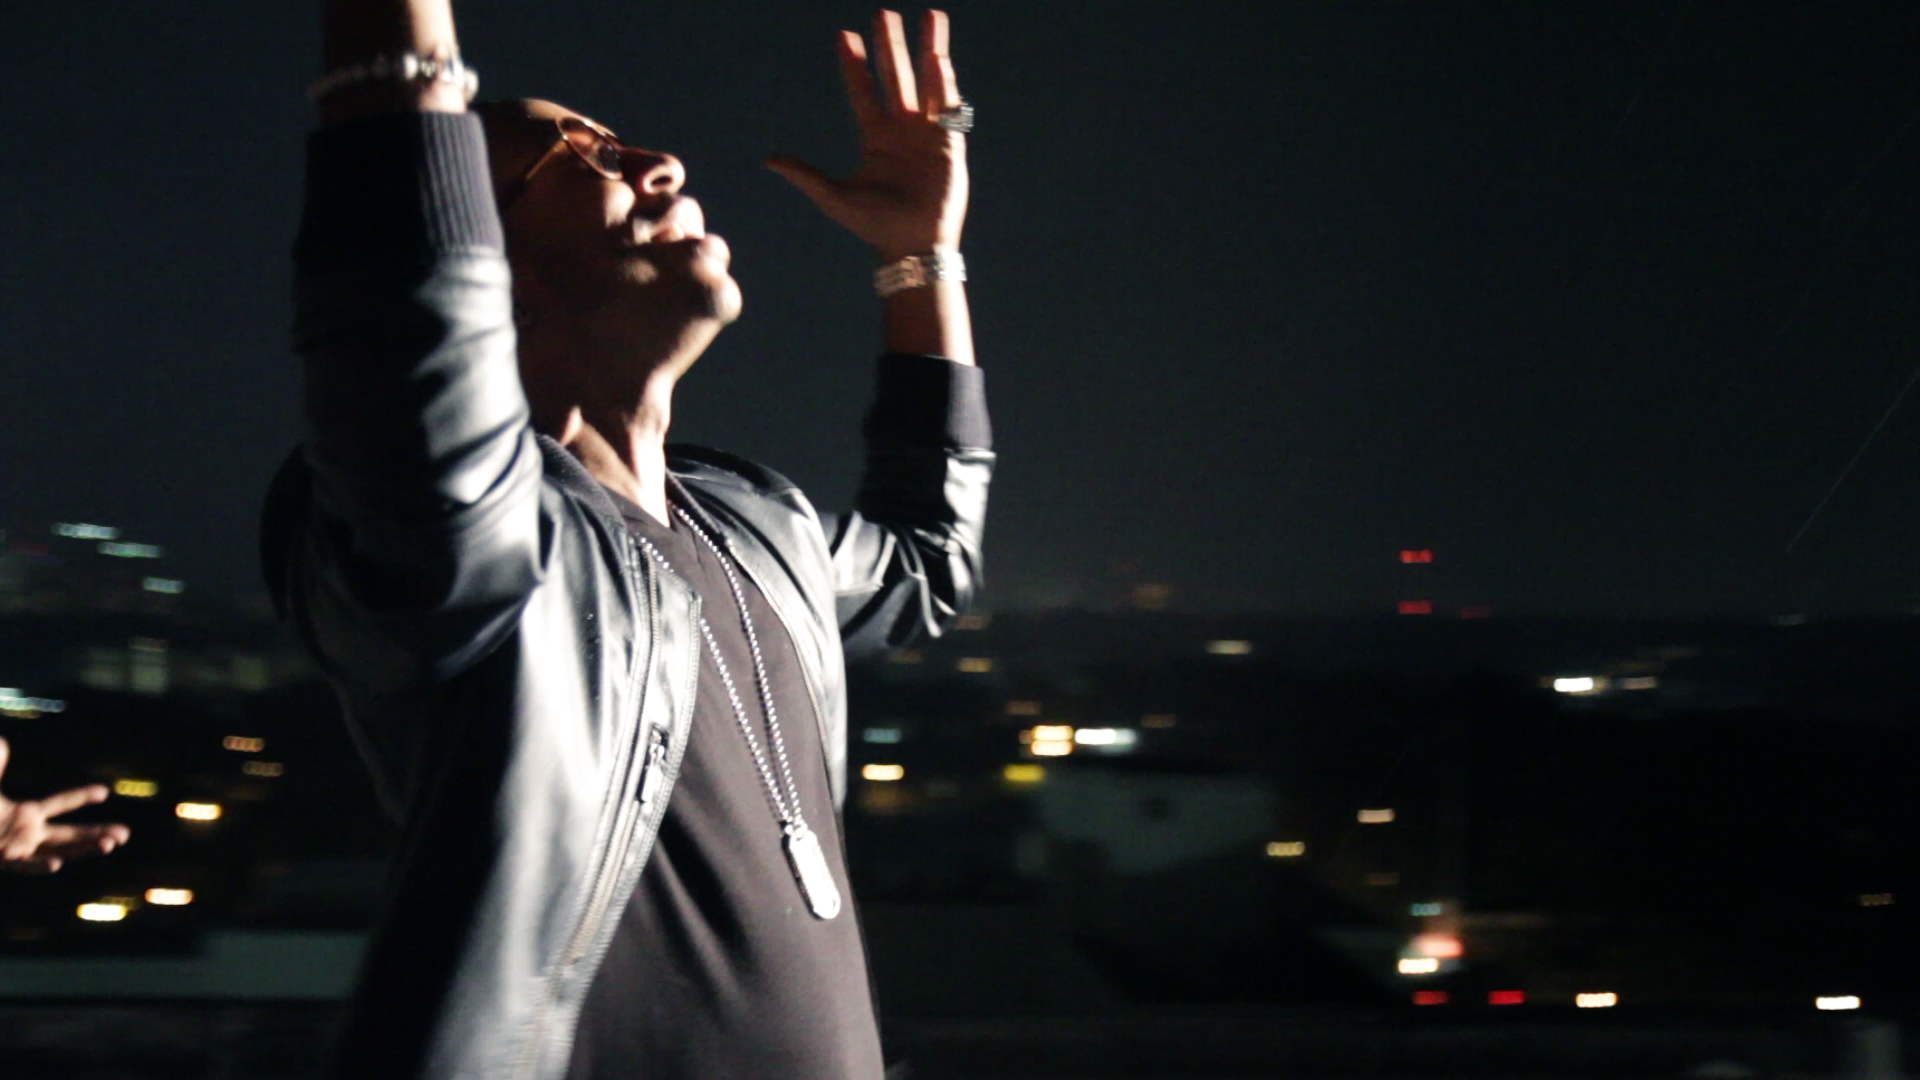 Filming Ludacris on set for the new music video. We were 13 stories up...on the roof!